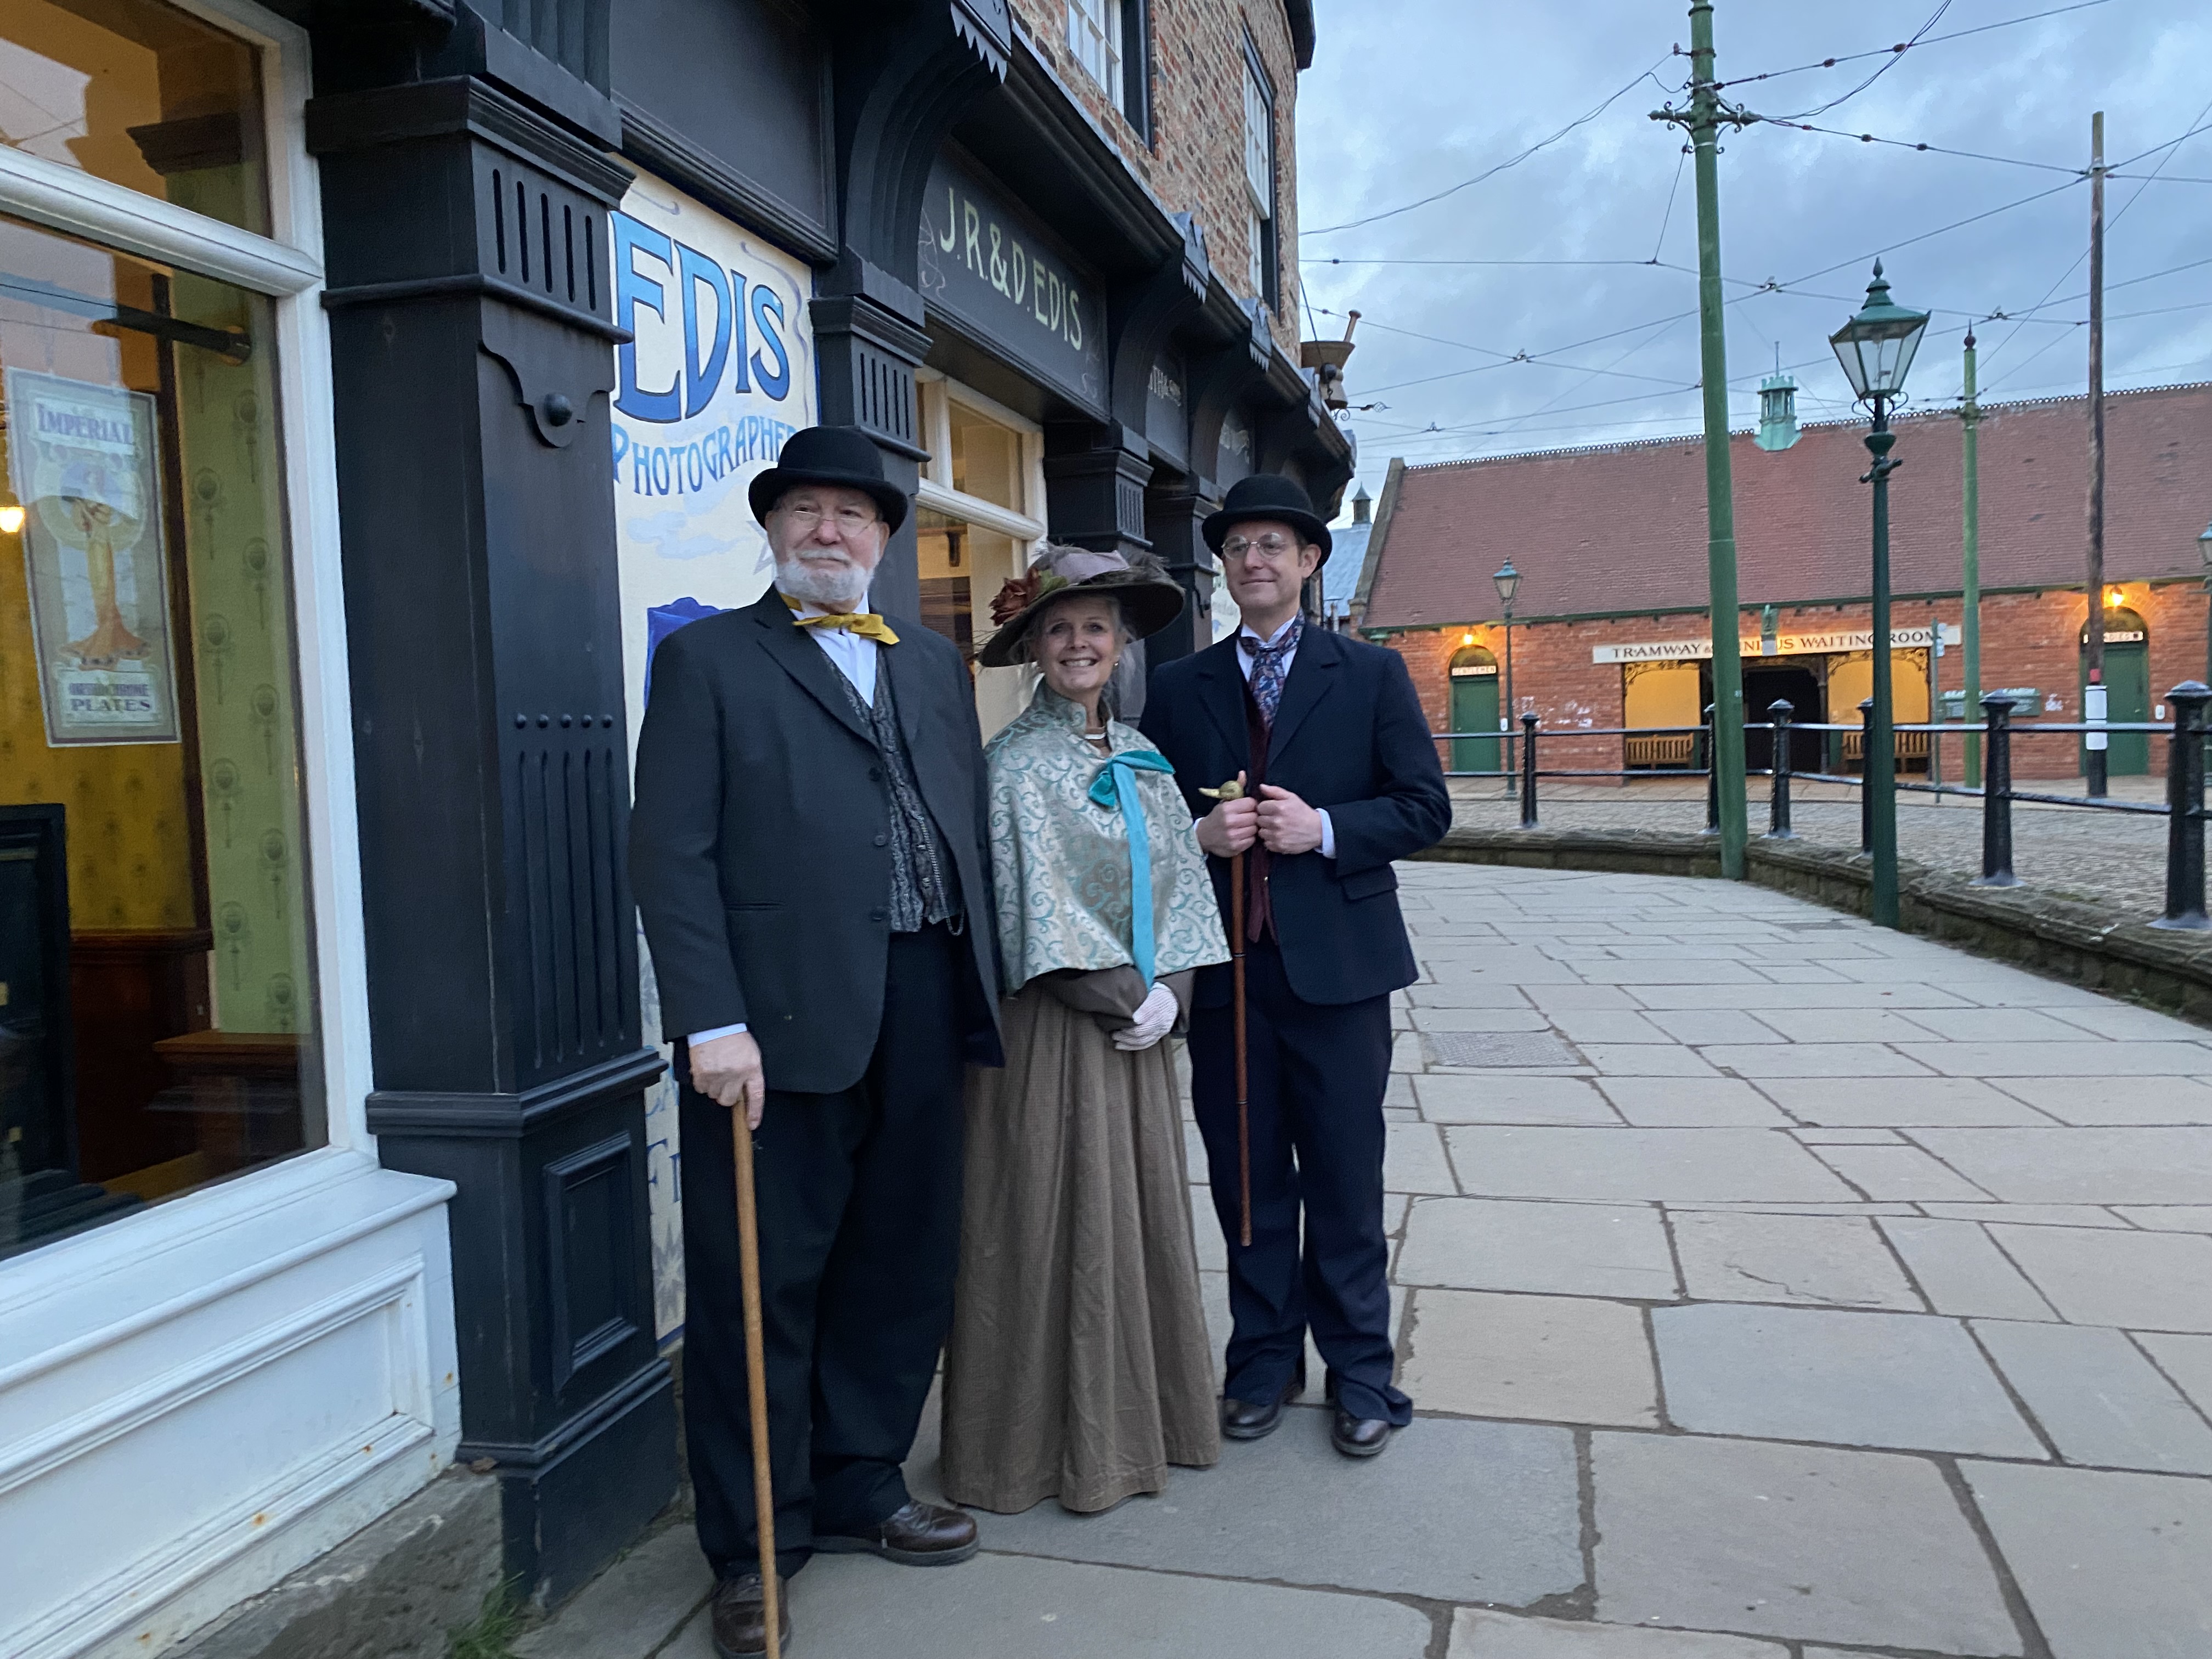 Mike, Janice and Matt Baker stand outside JR & D Edis Photographers dressed in Edwardian costume as part of the filming for Matt Baker: Travels with Mum and Dad